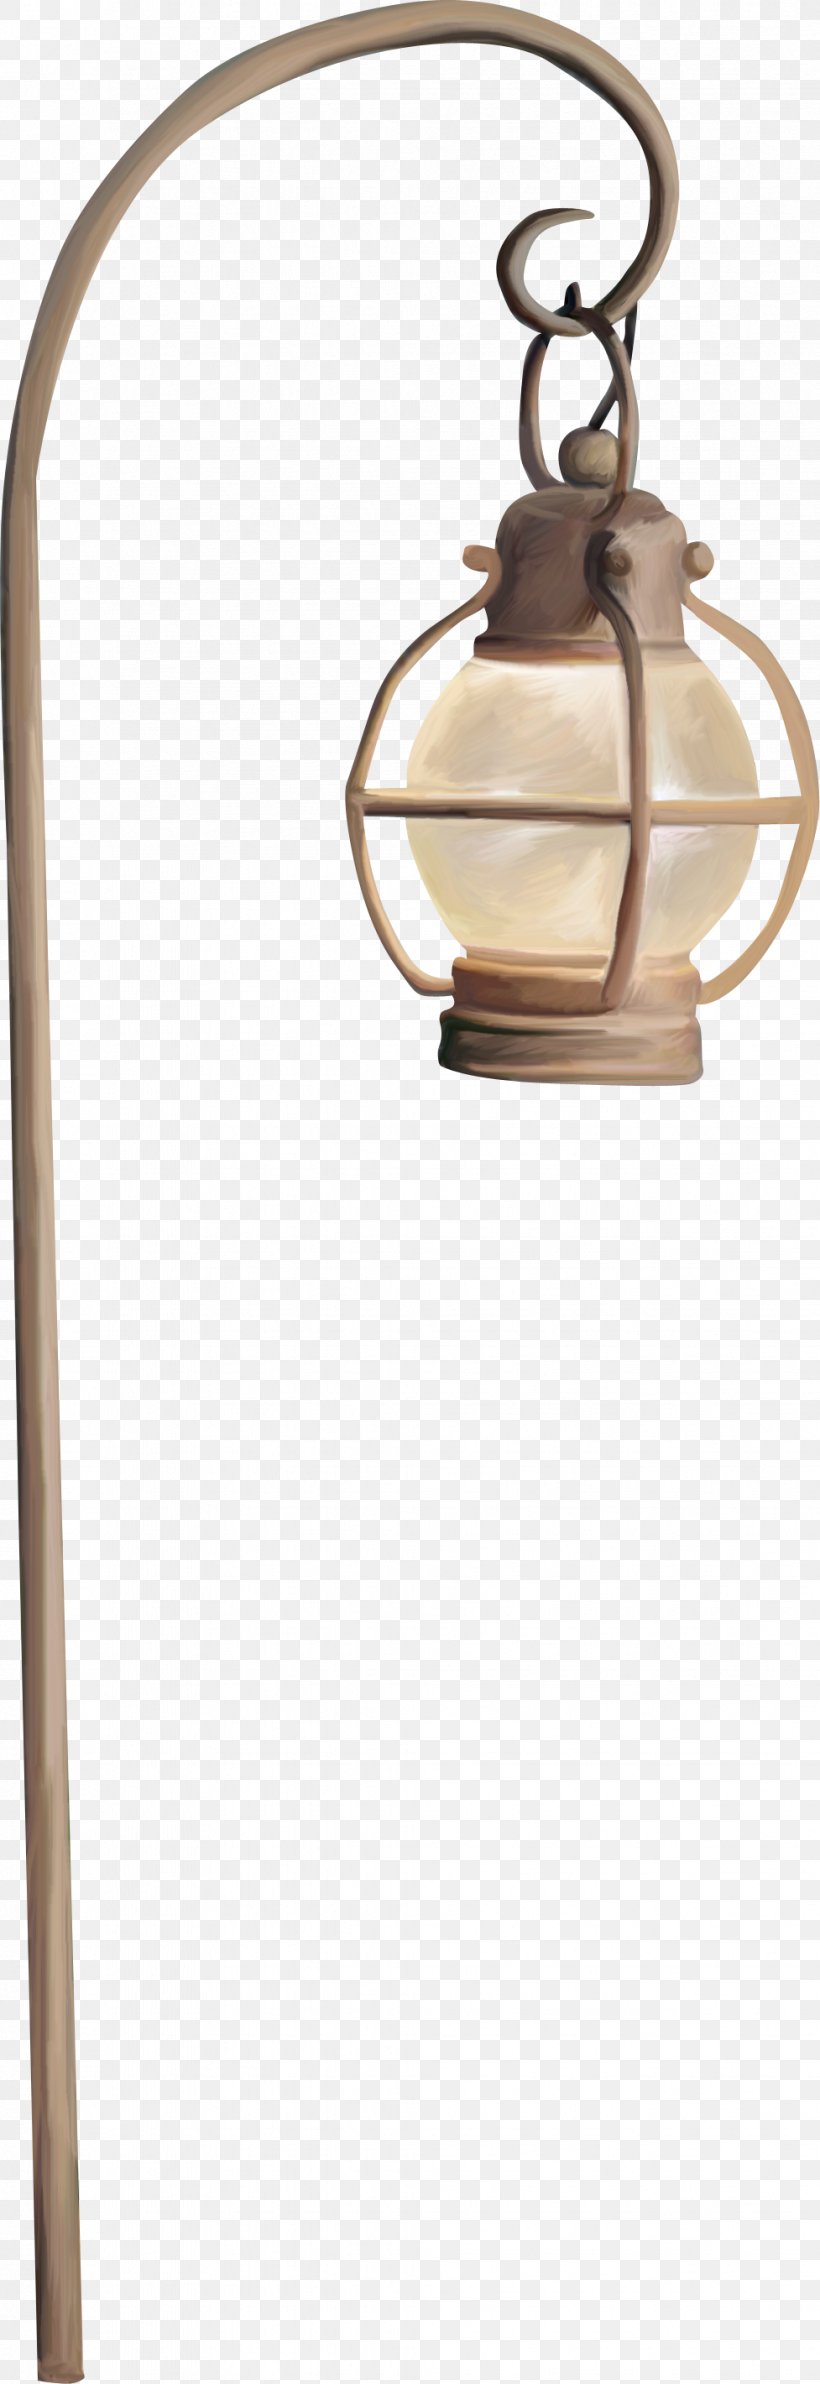 Light 01504 Low Voltage, PNG, 977x2841px, Light, Brass, Ceiling, Ceiling Fixture, Kettle Download Free